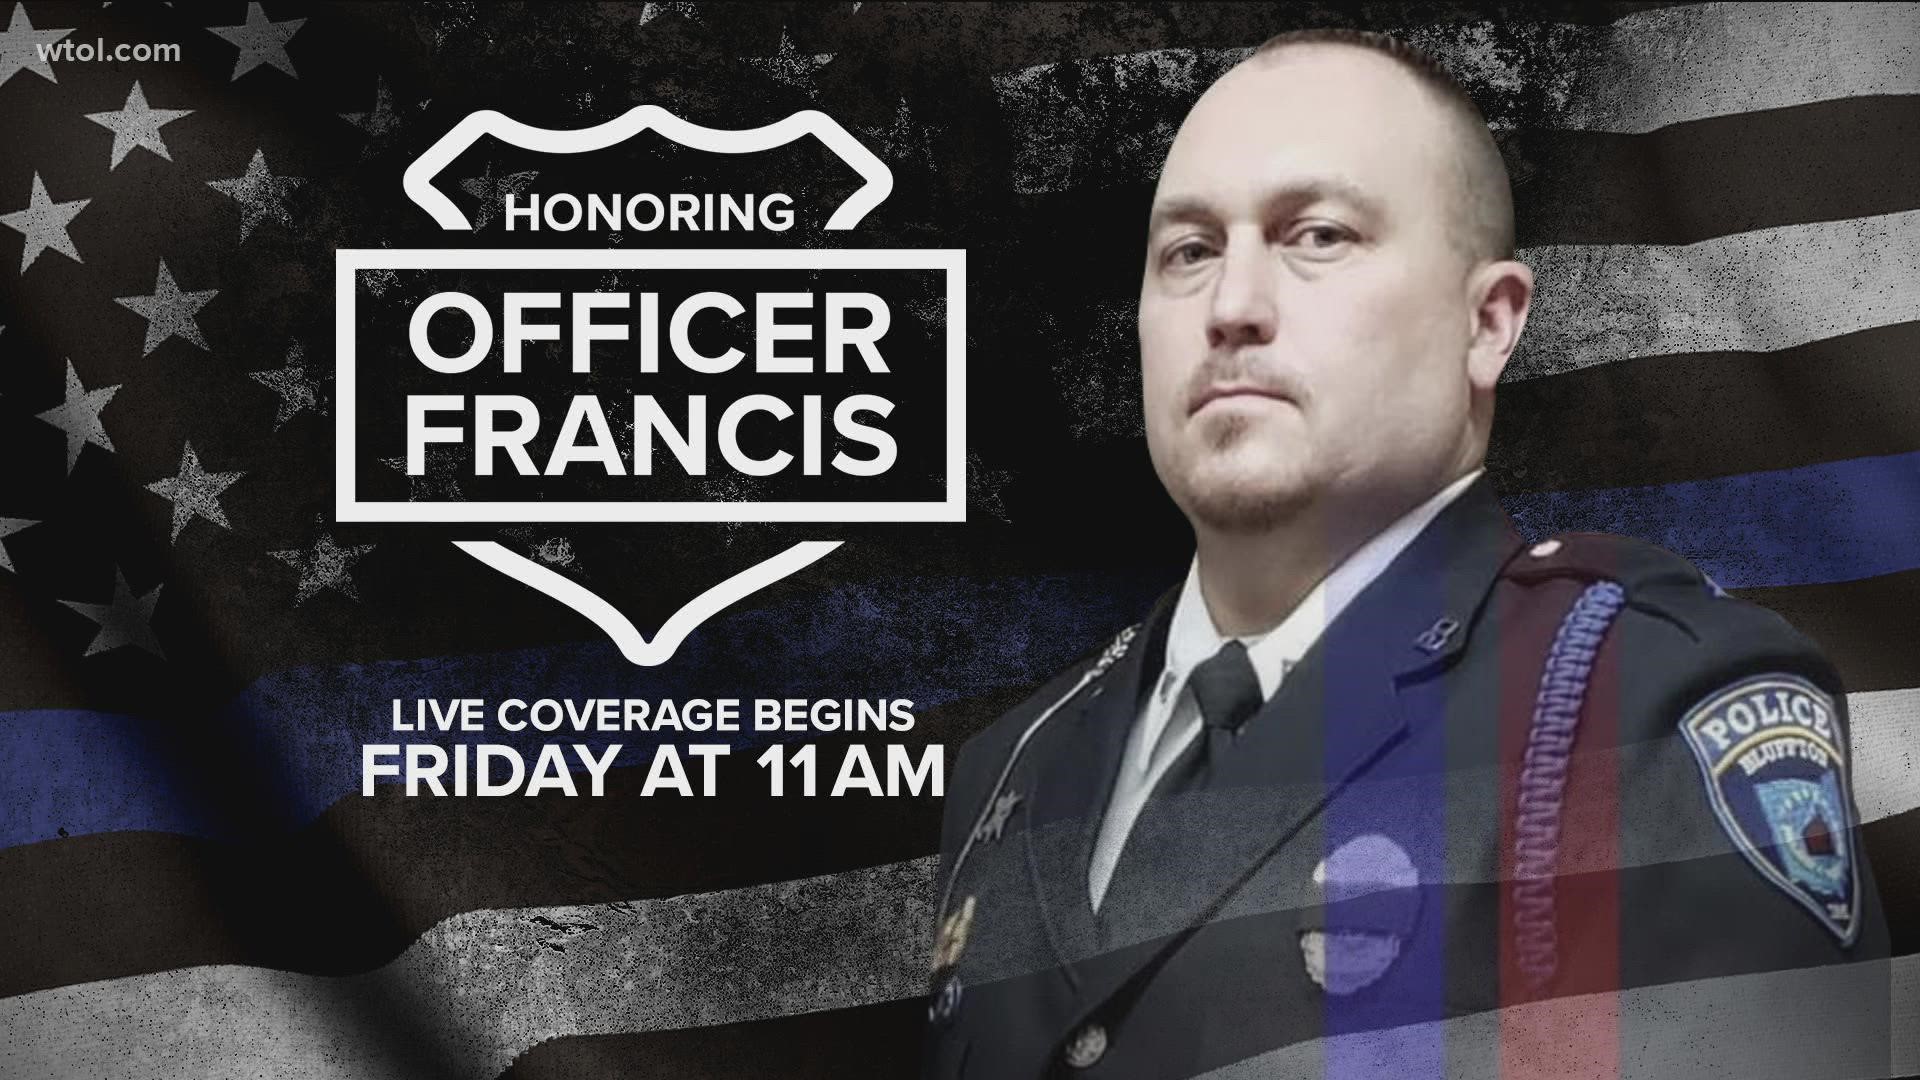 We discuss how you can pay your respects to Officer Francis on Friday during the funeral, and other ways you can help the Francis family.